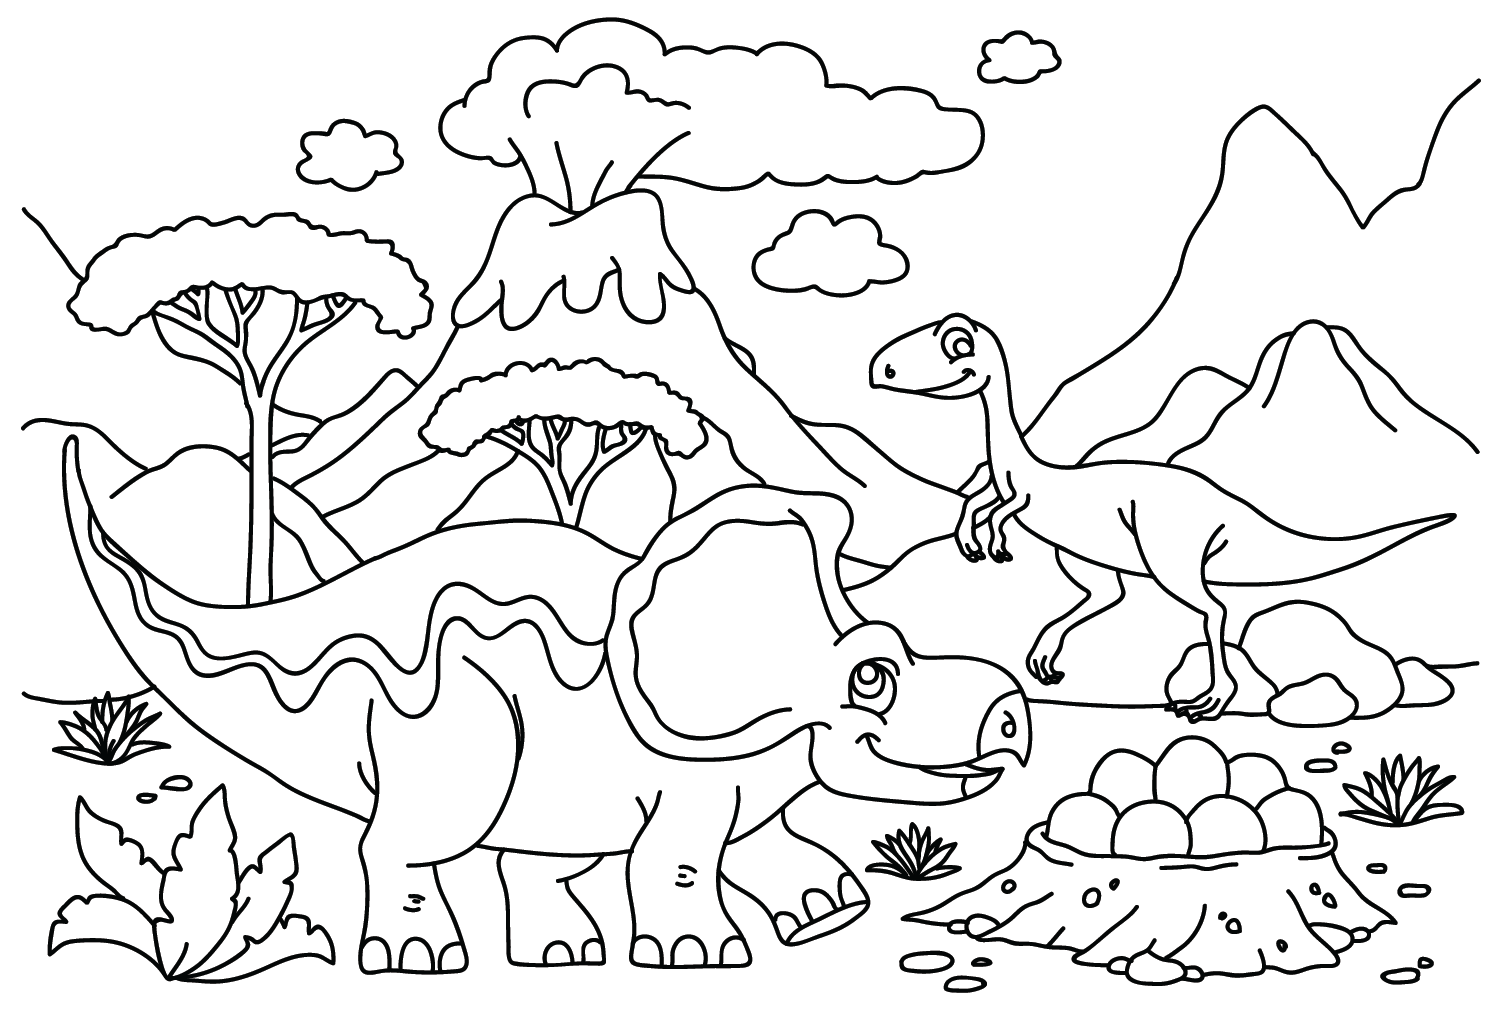 Free Printable Protoceratops Coloring Page from Dinosaurs